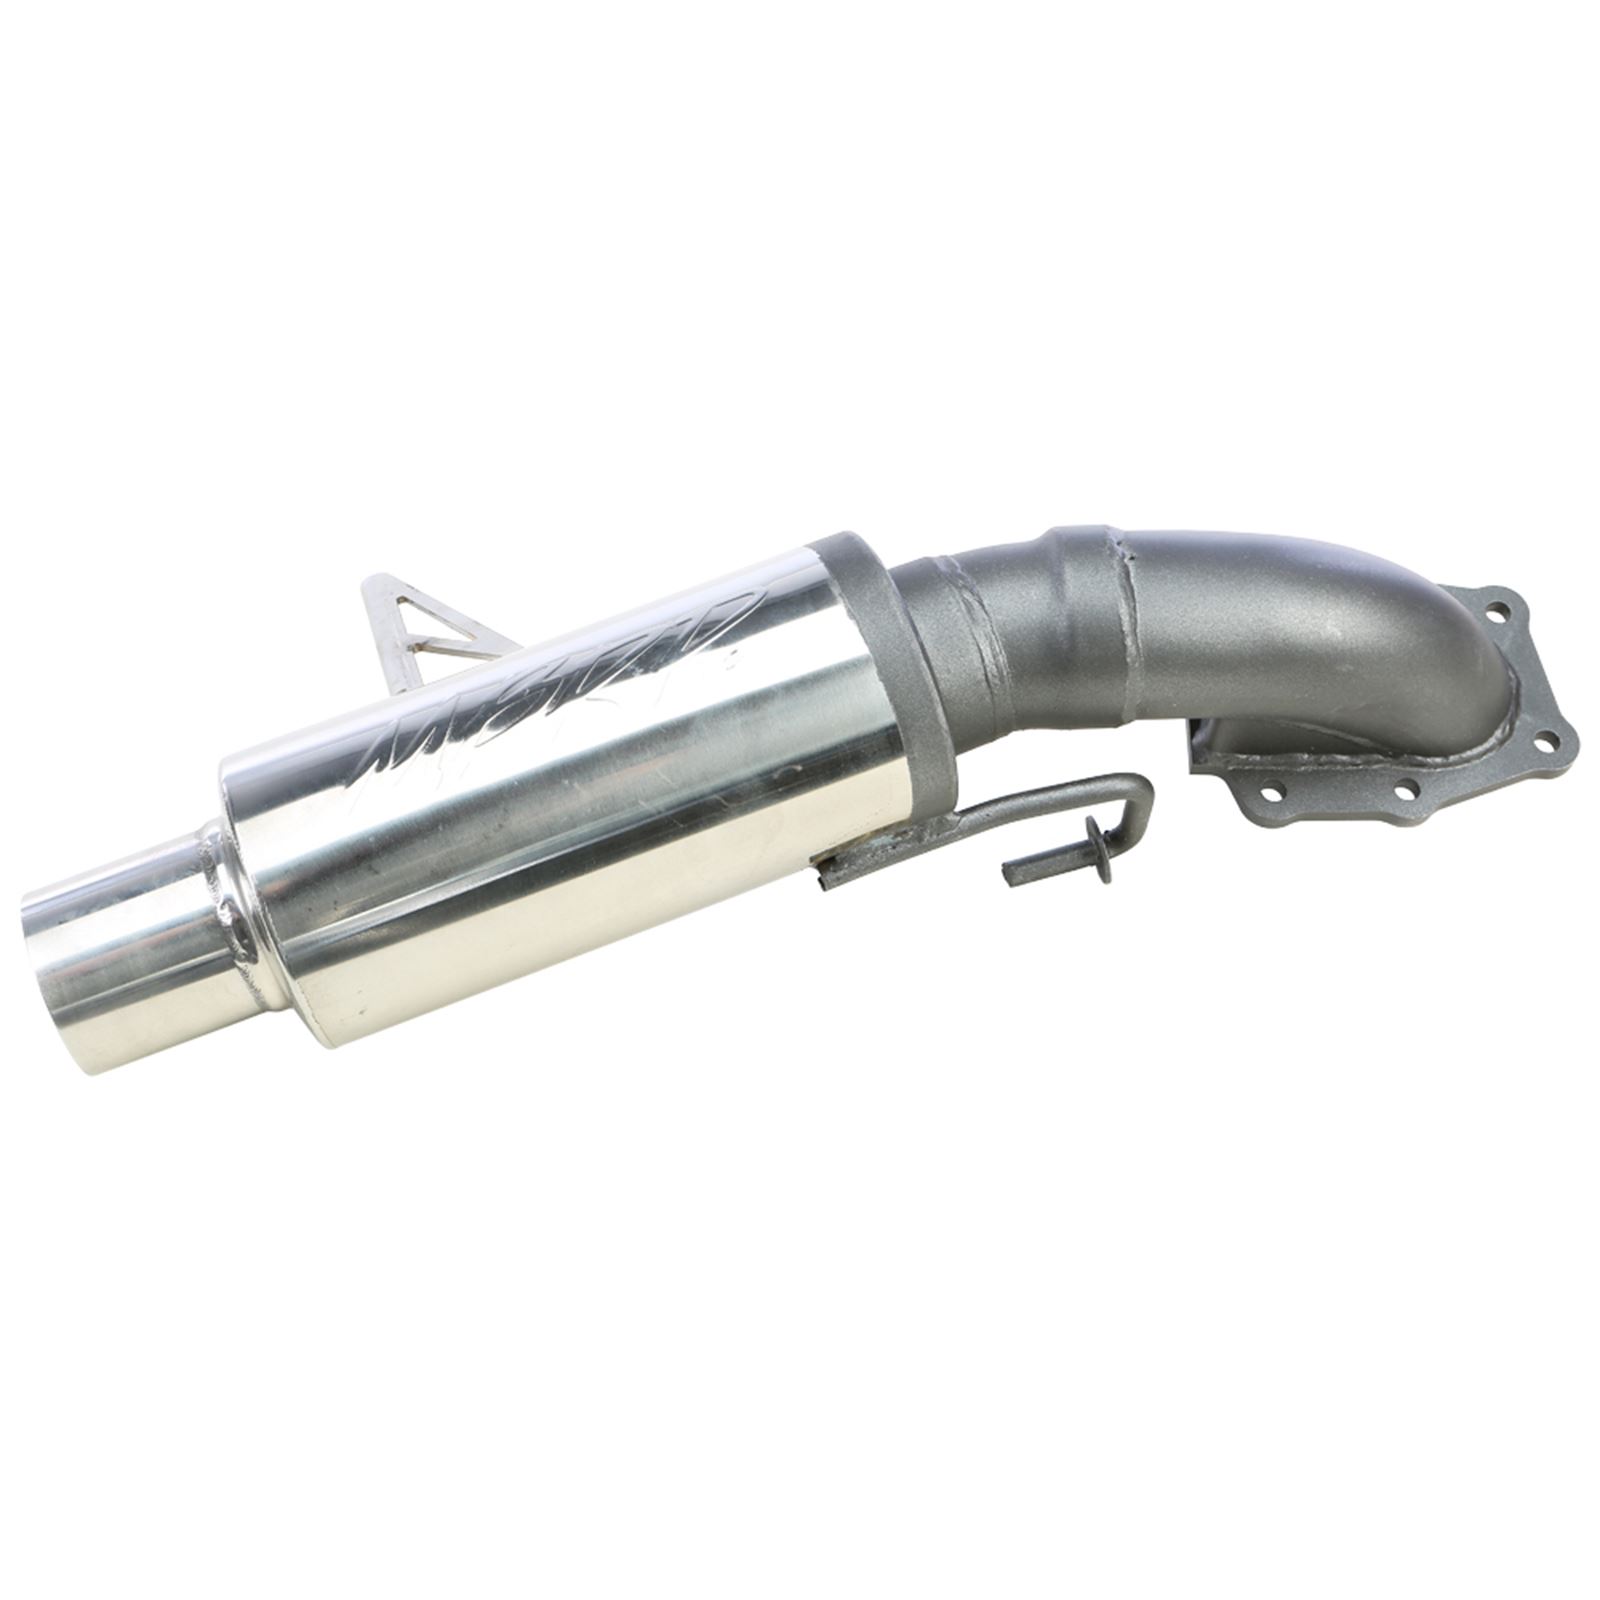 MBRP PERFORMANCE EXHAUST RACE SILENCER 4060210 